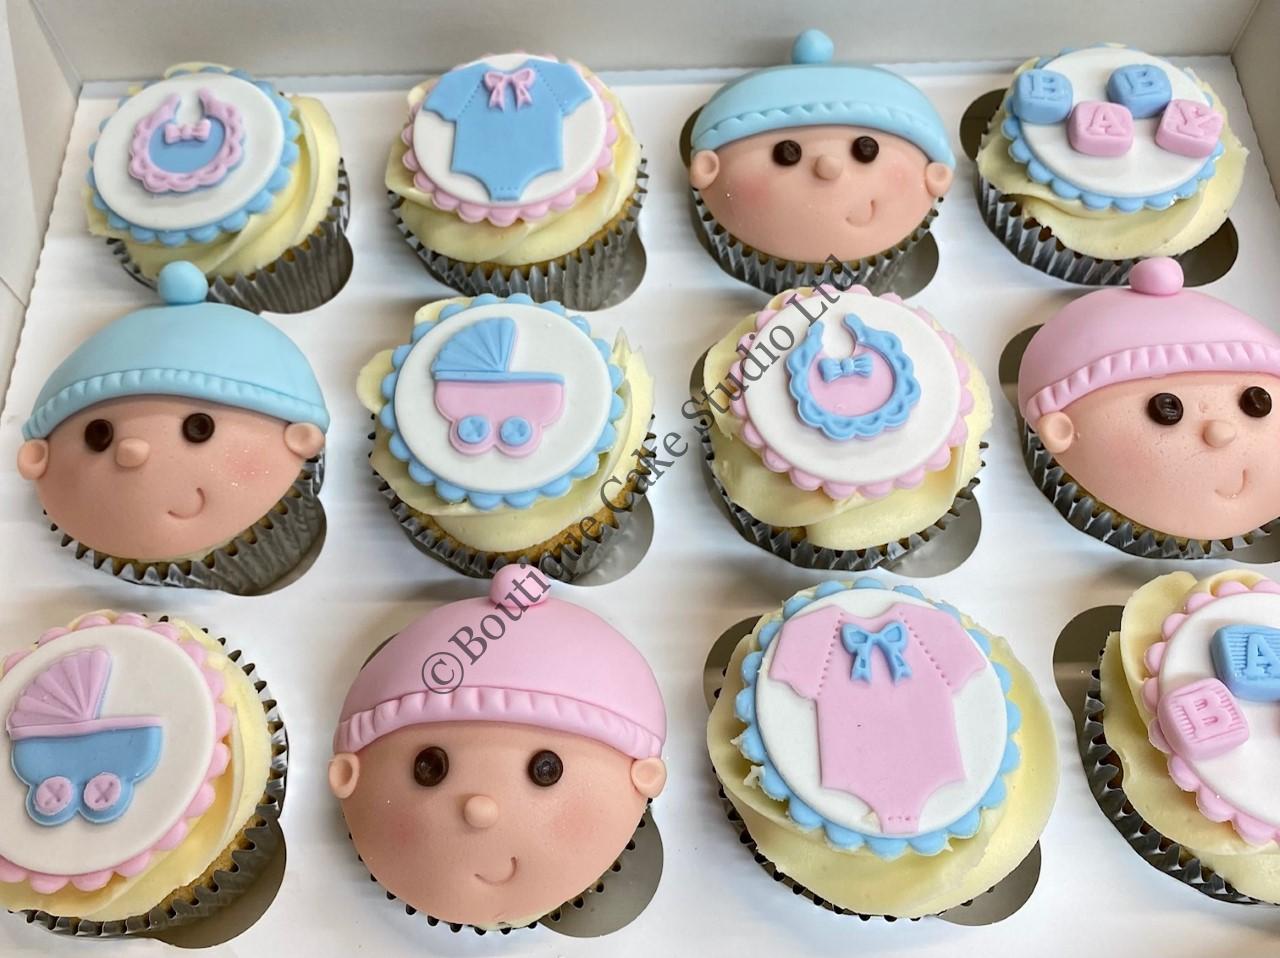 Boy or Girl Baby Shower Cupcakes